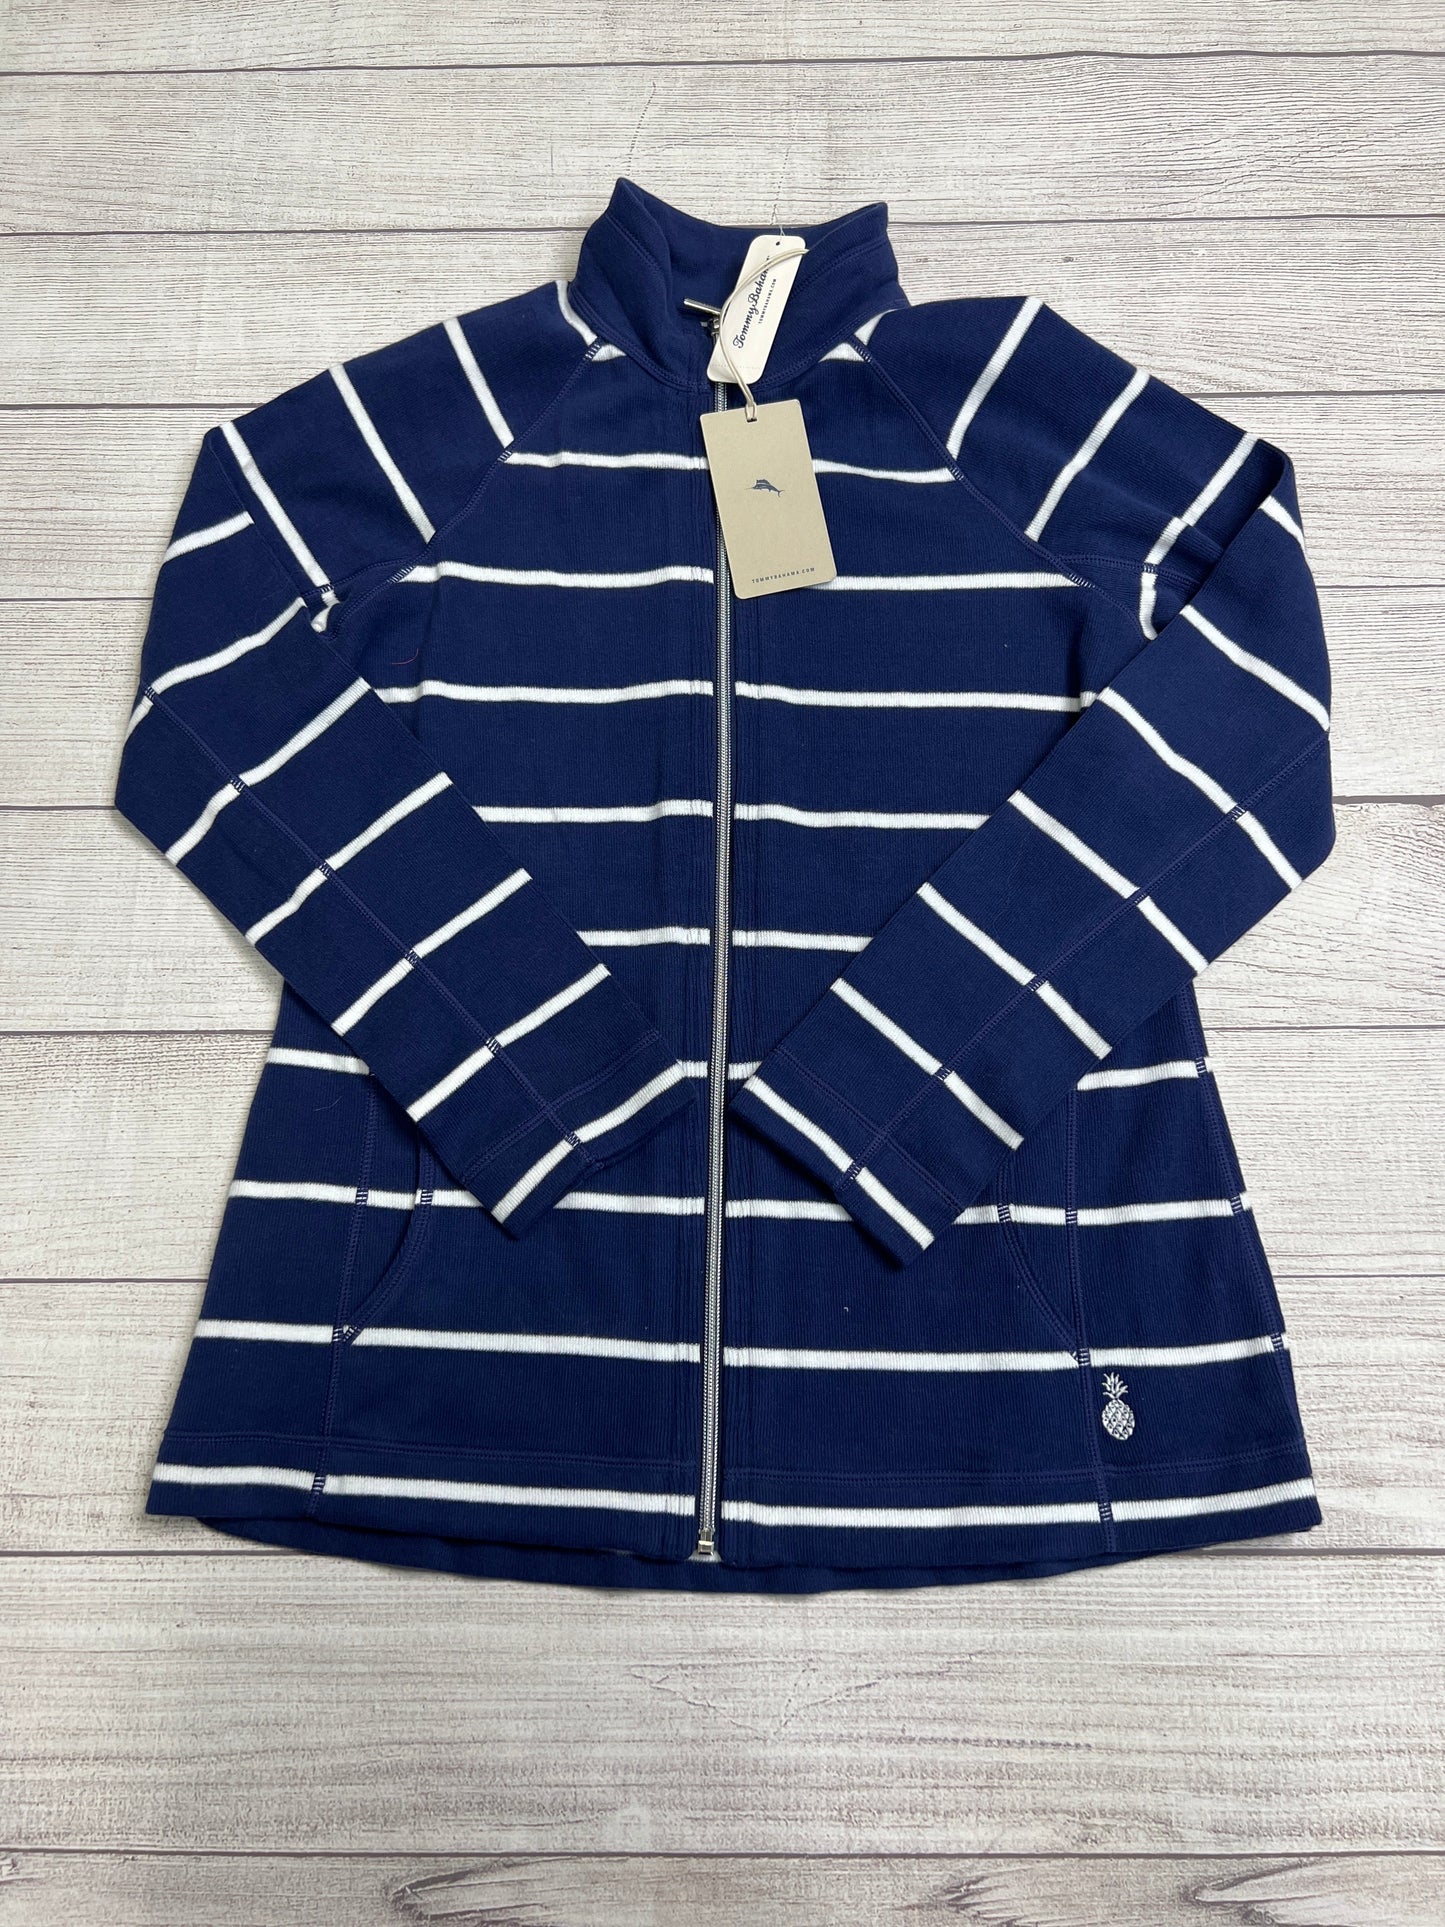 NEW! Jacket Other By Tommy Bahama  Size: S